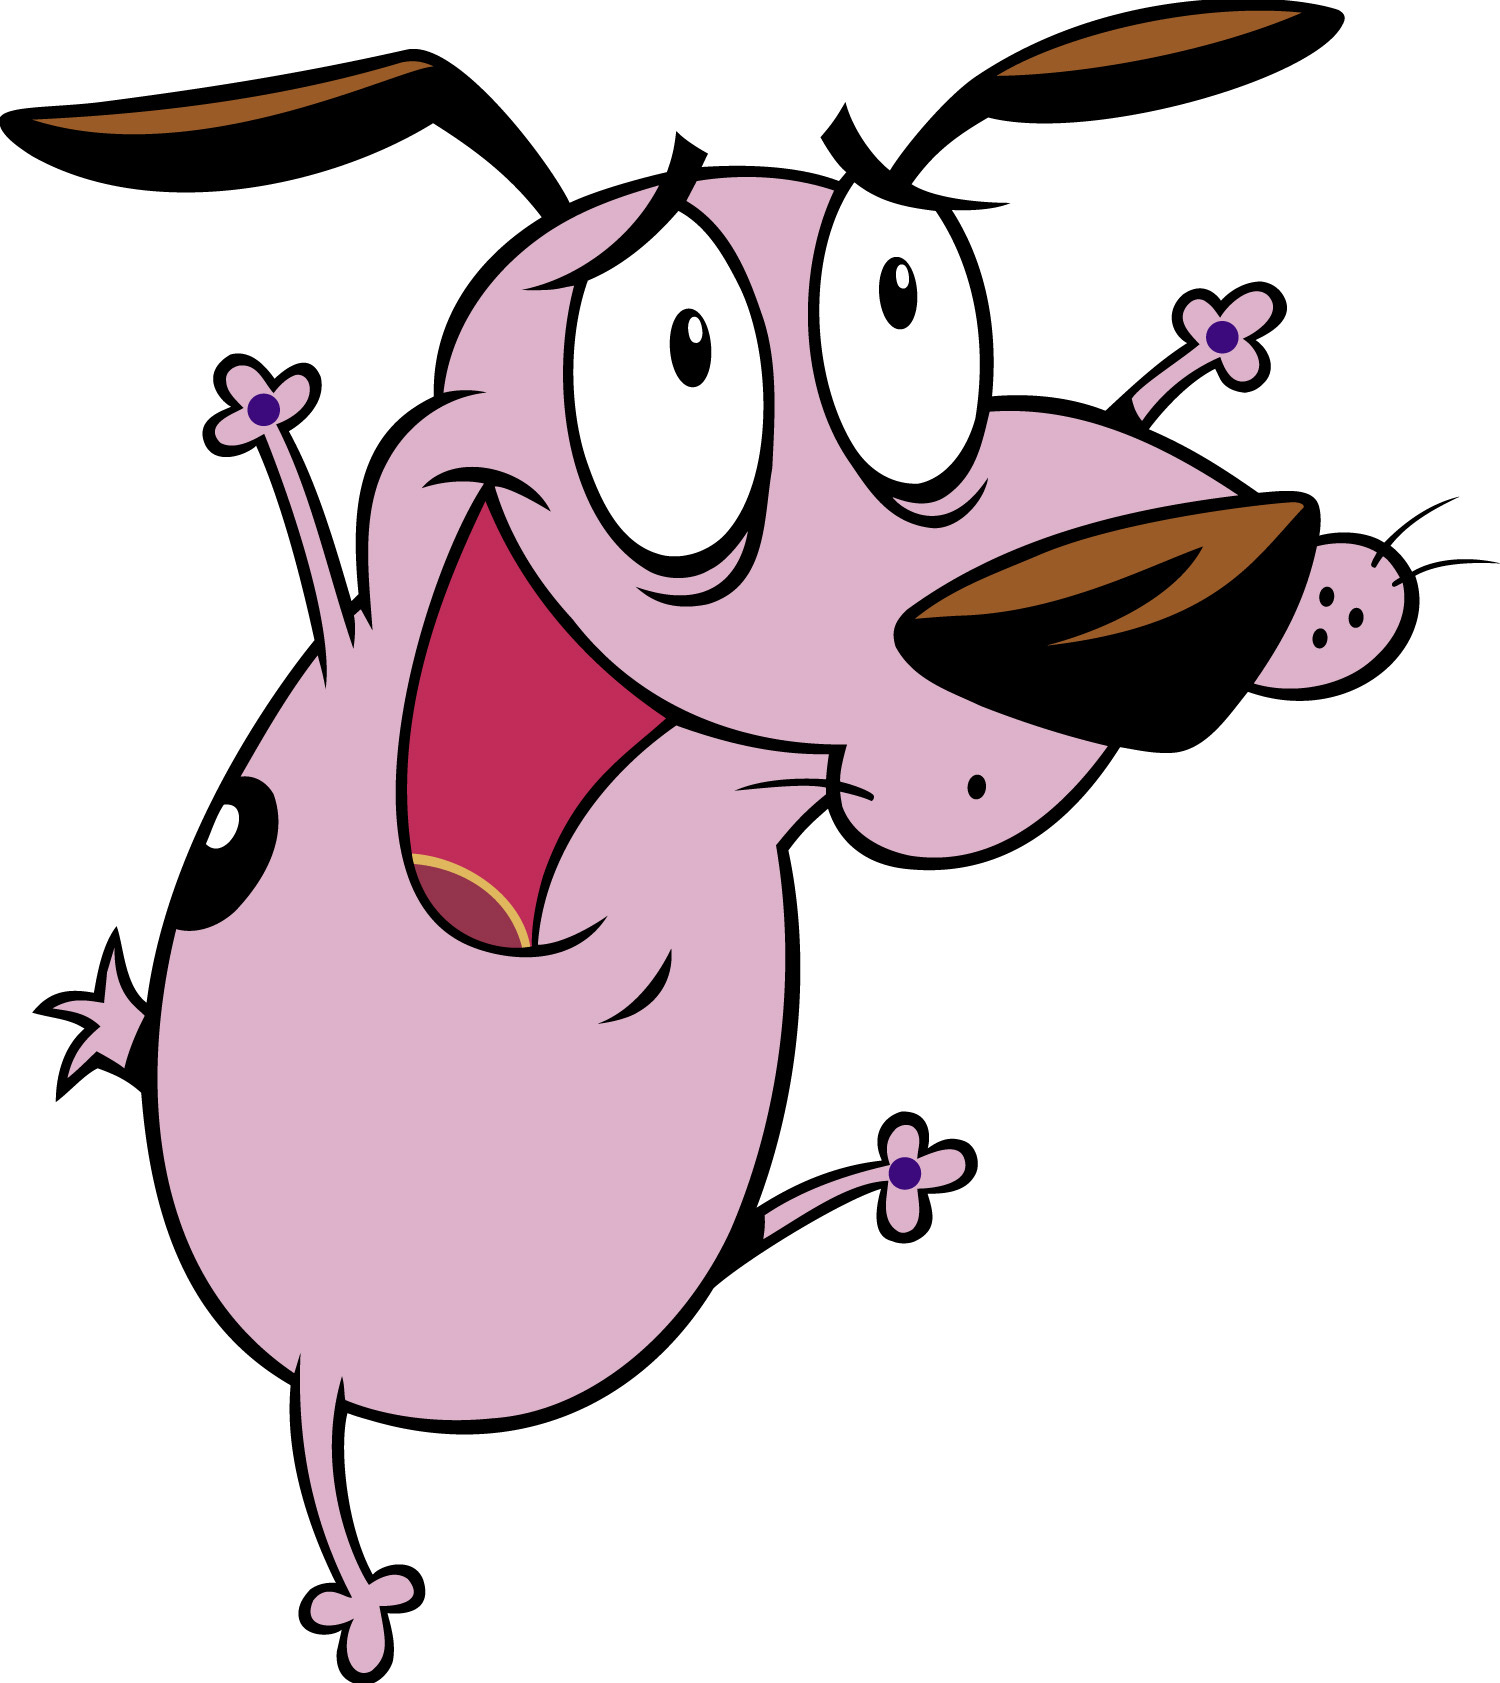 Courage the Cowardly Dog Picture - Download hd wallpapers